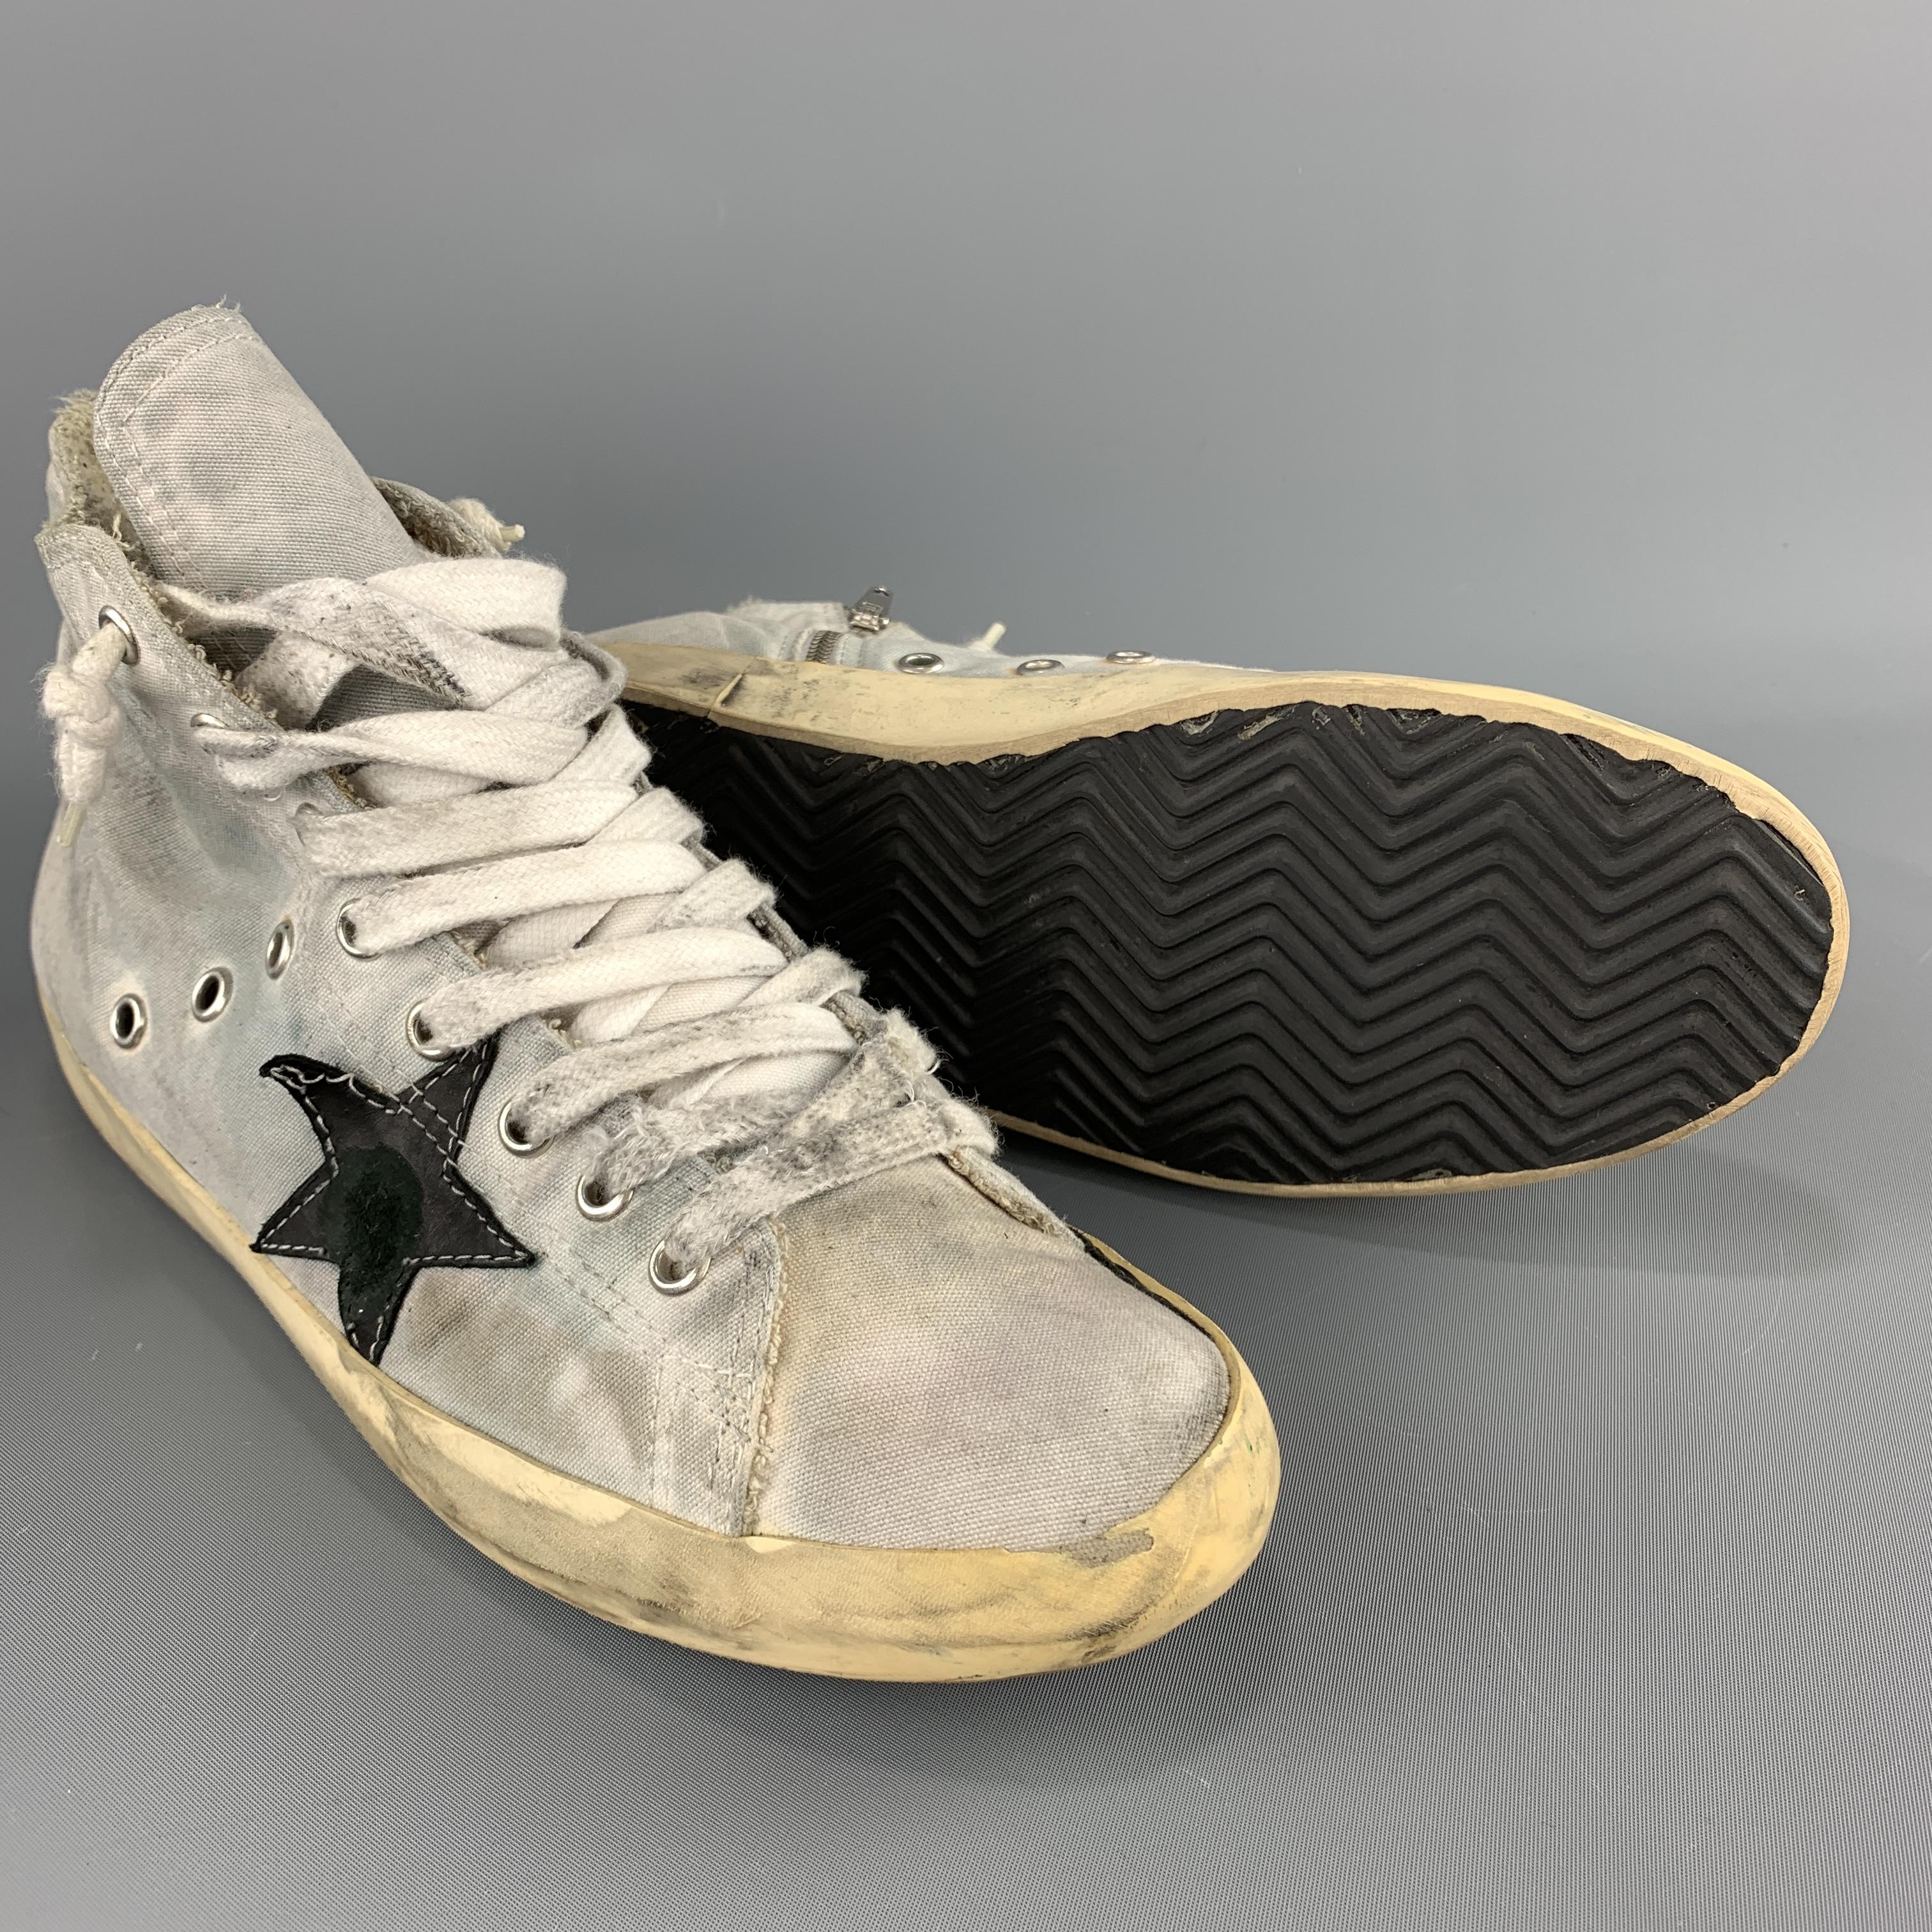 Beige GOLDEN GOOSE 'Private Shos Sport' Collection Size 10 Gray Canvas Distressed Snea